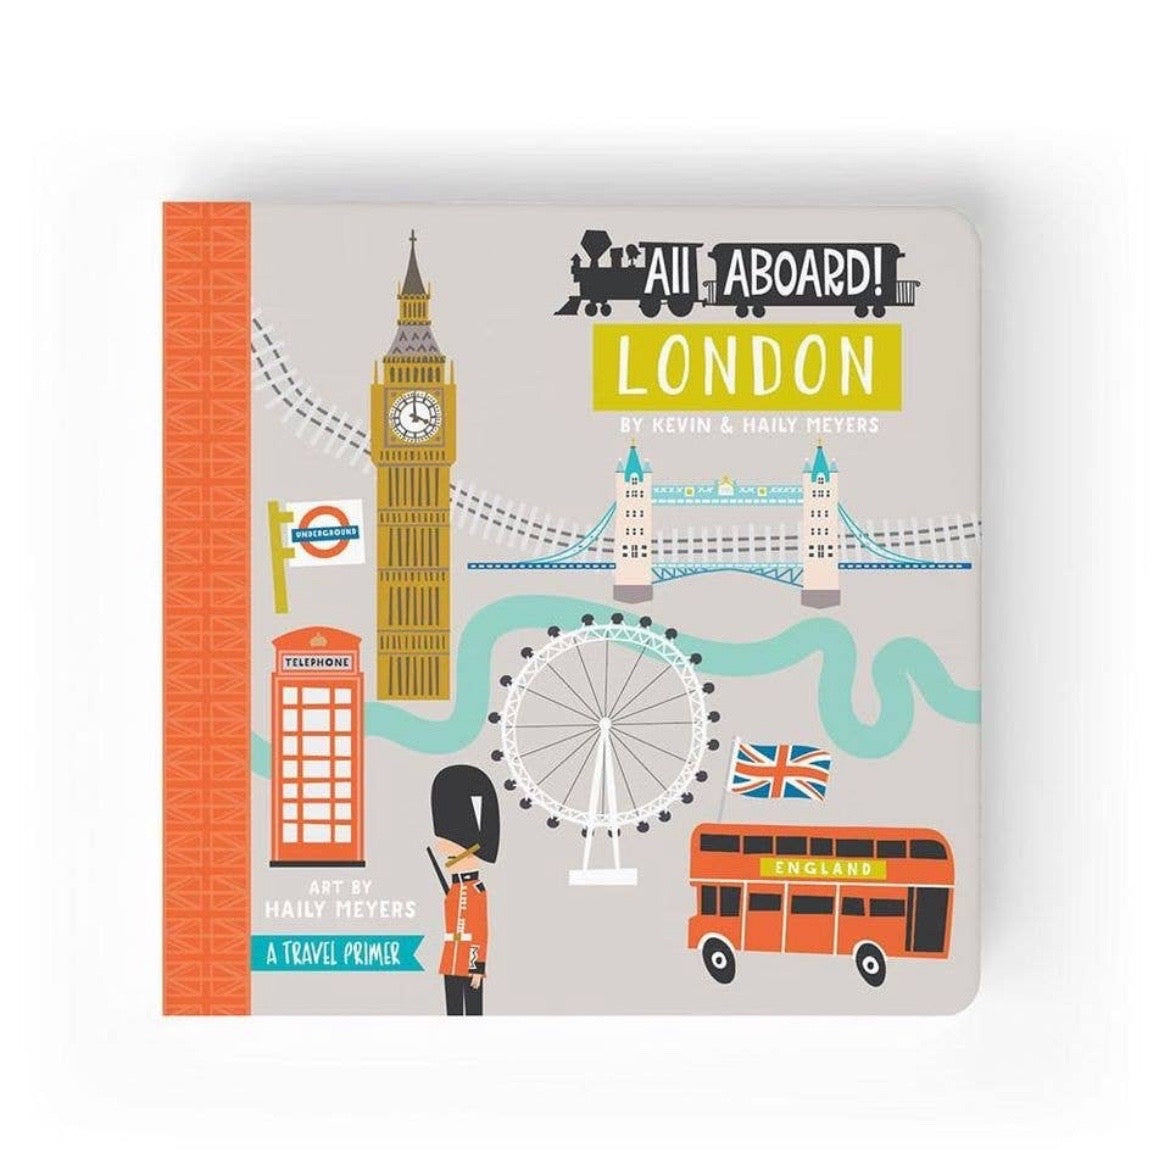 Wander through the streets of London with this travel primer